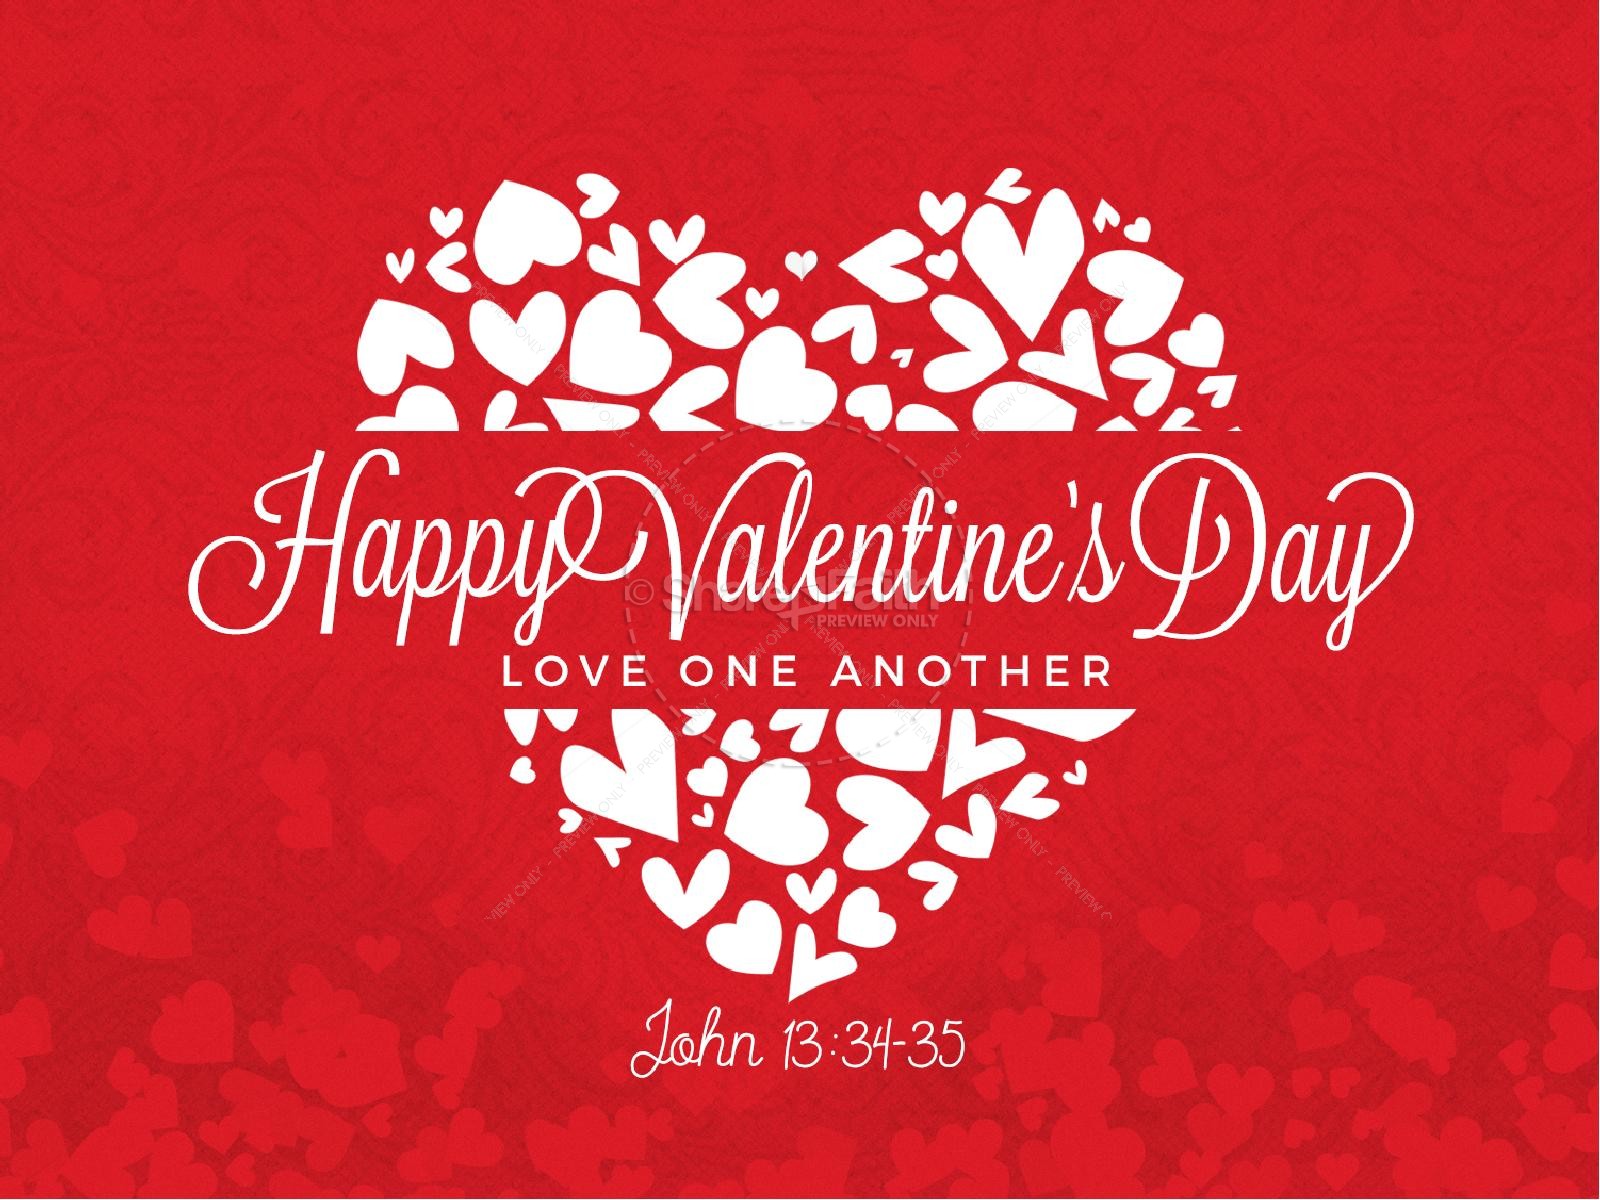 Happy Valentine's Day Love One Another Church PowerPoint